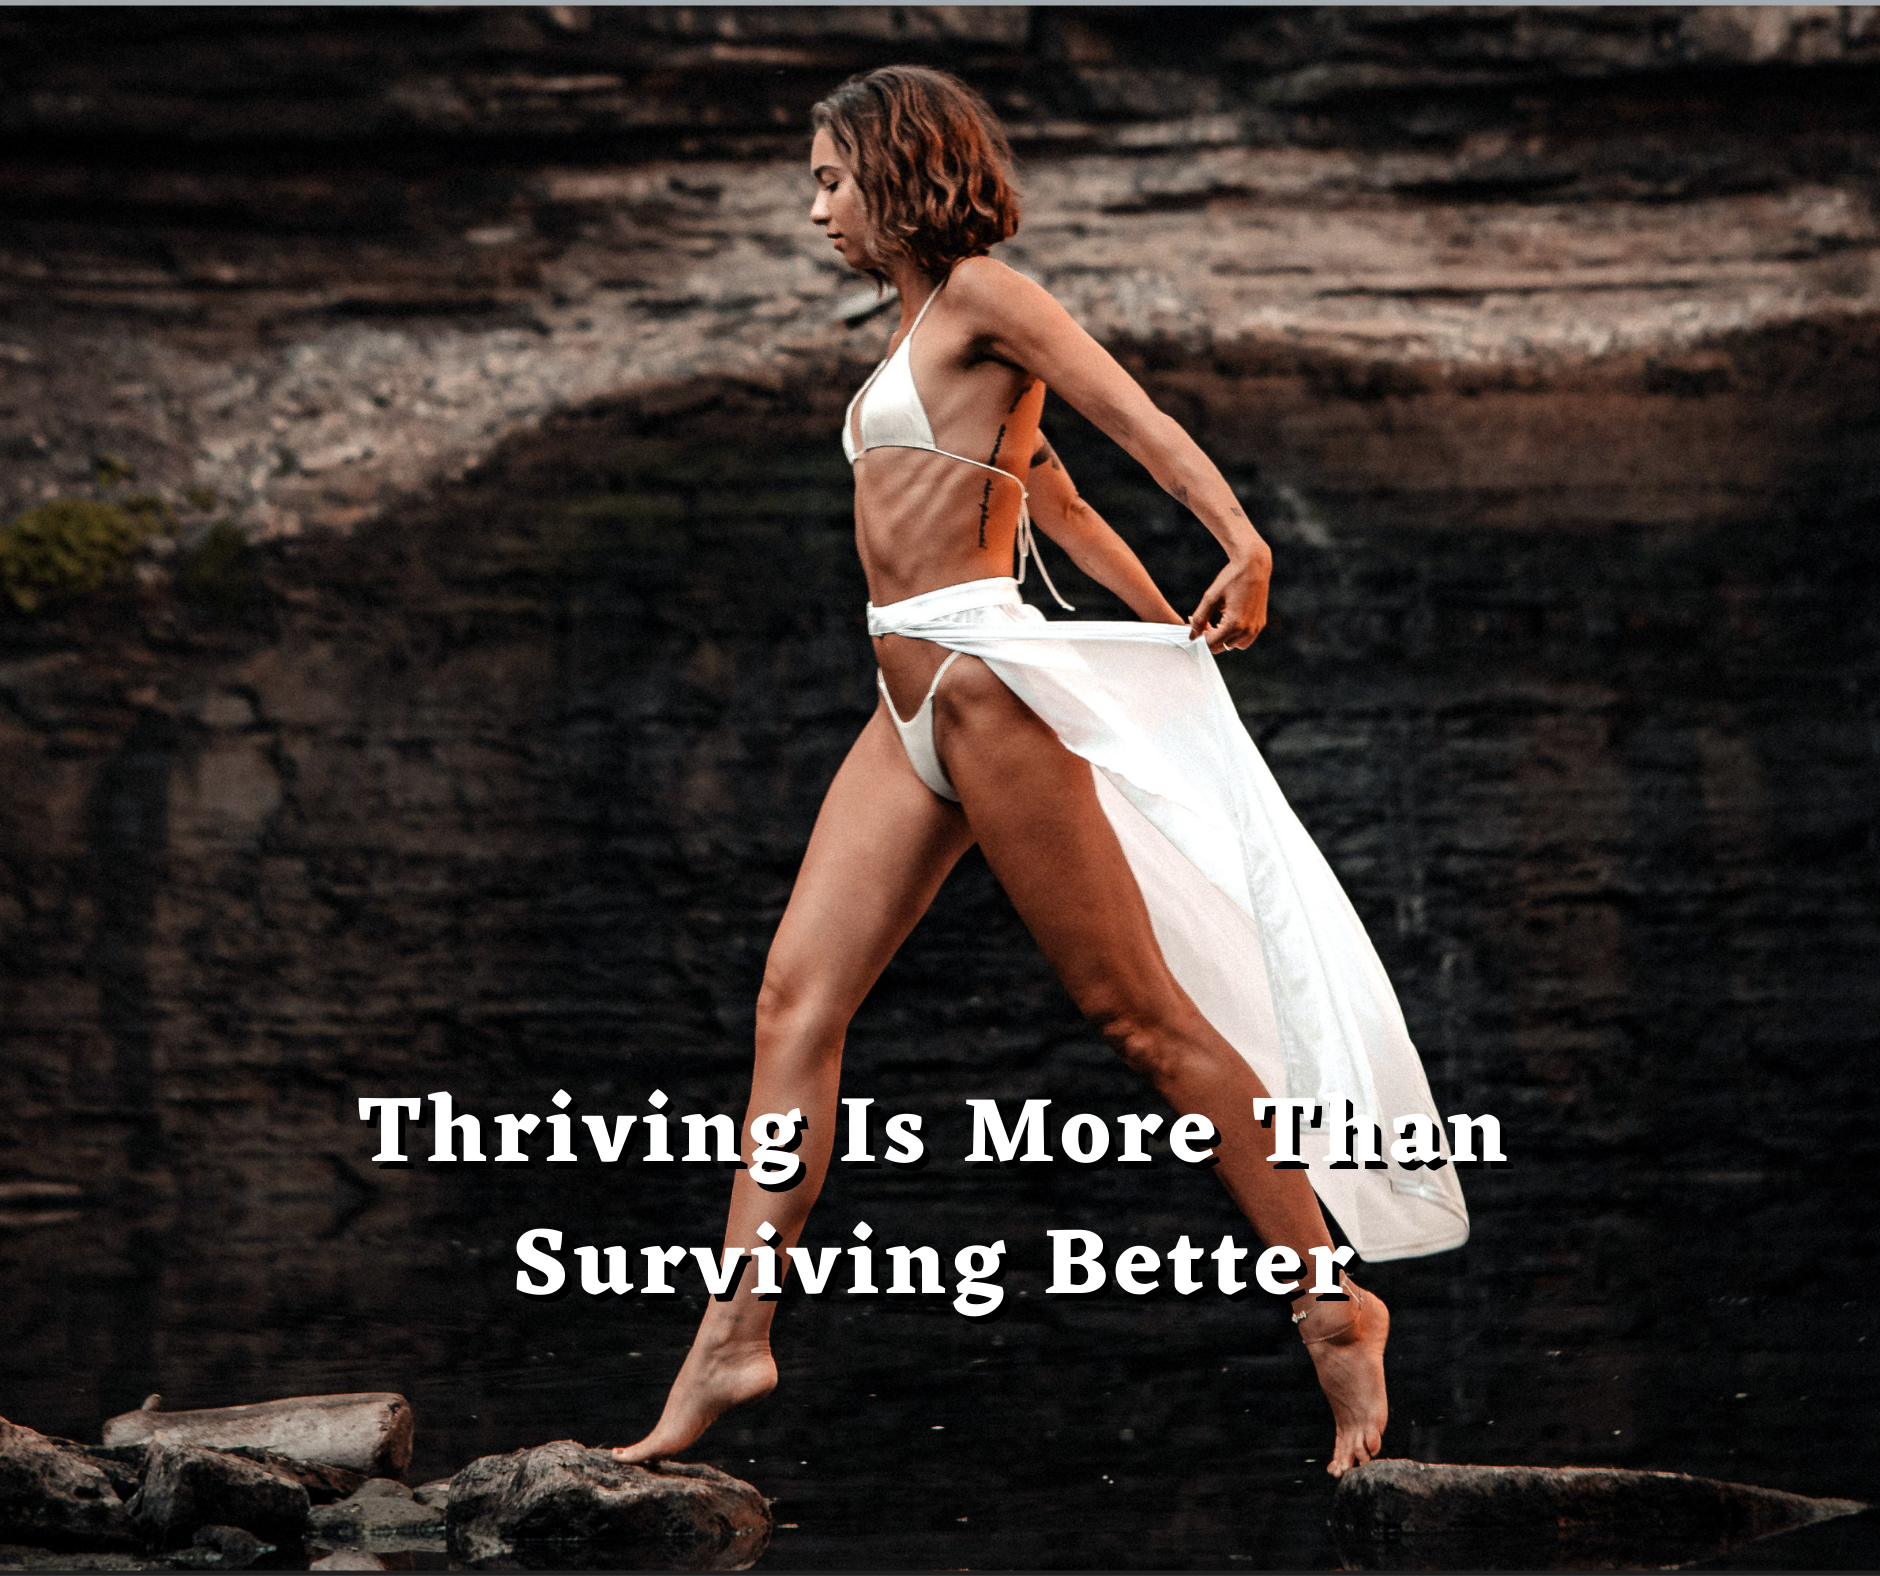 Thriving Is More Than Surviving Better